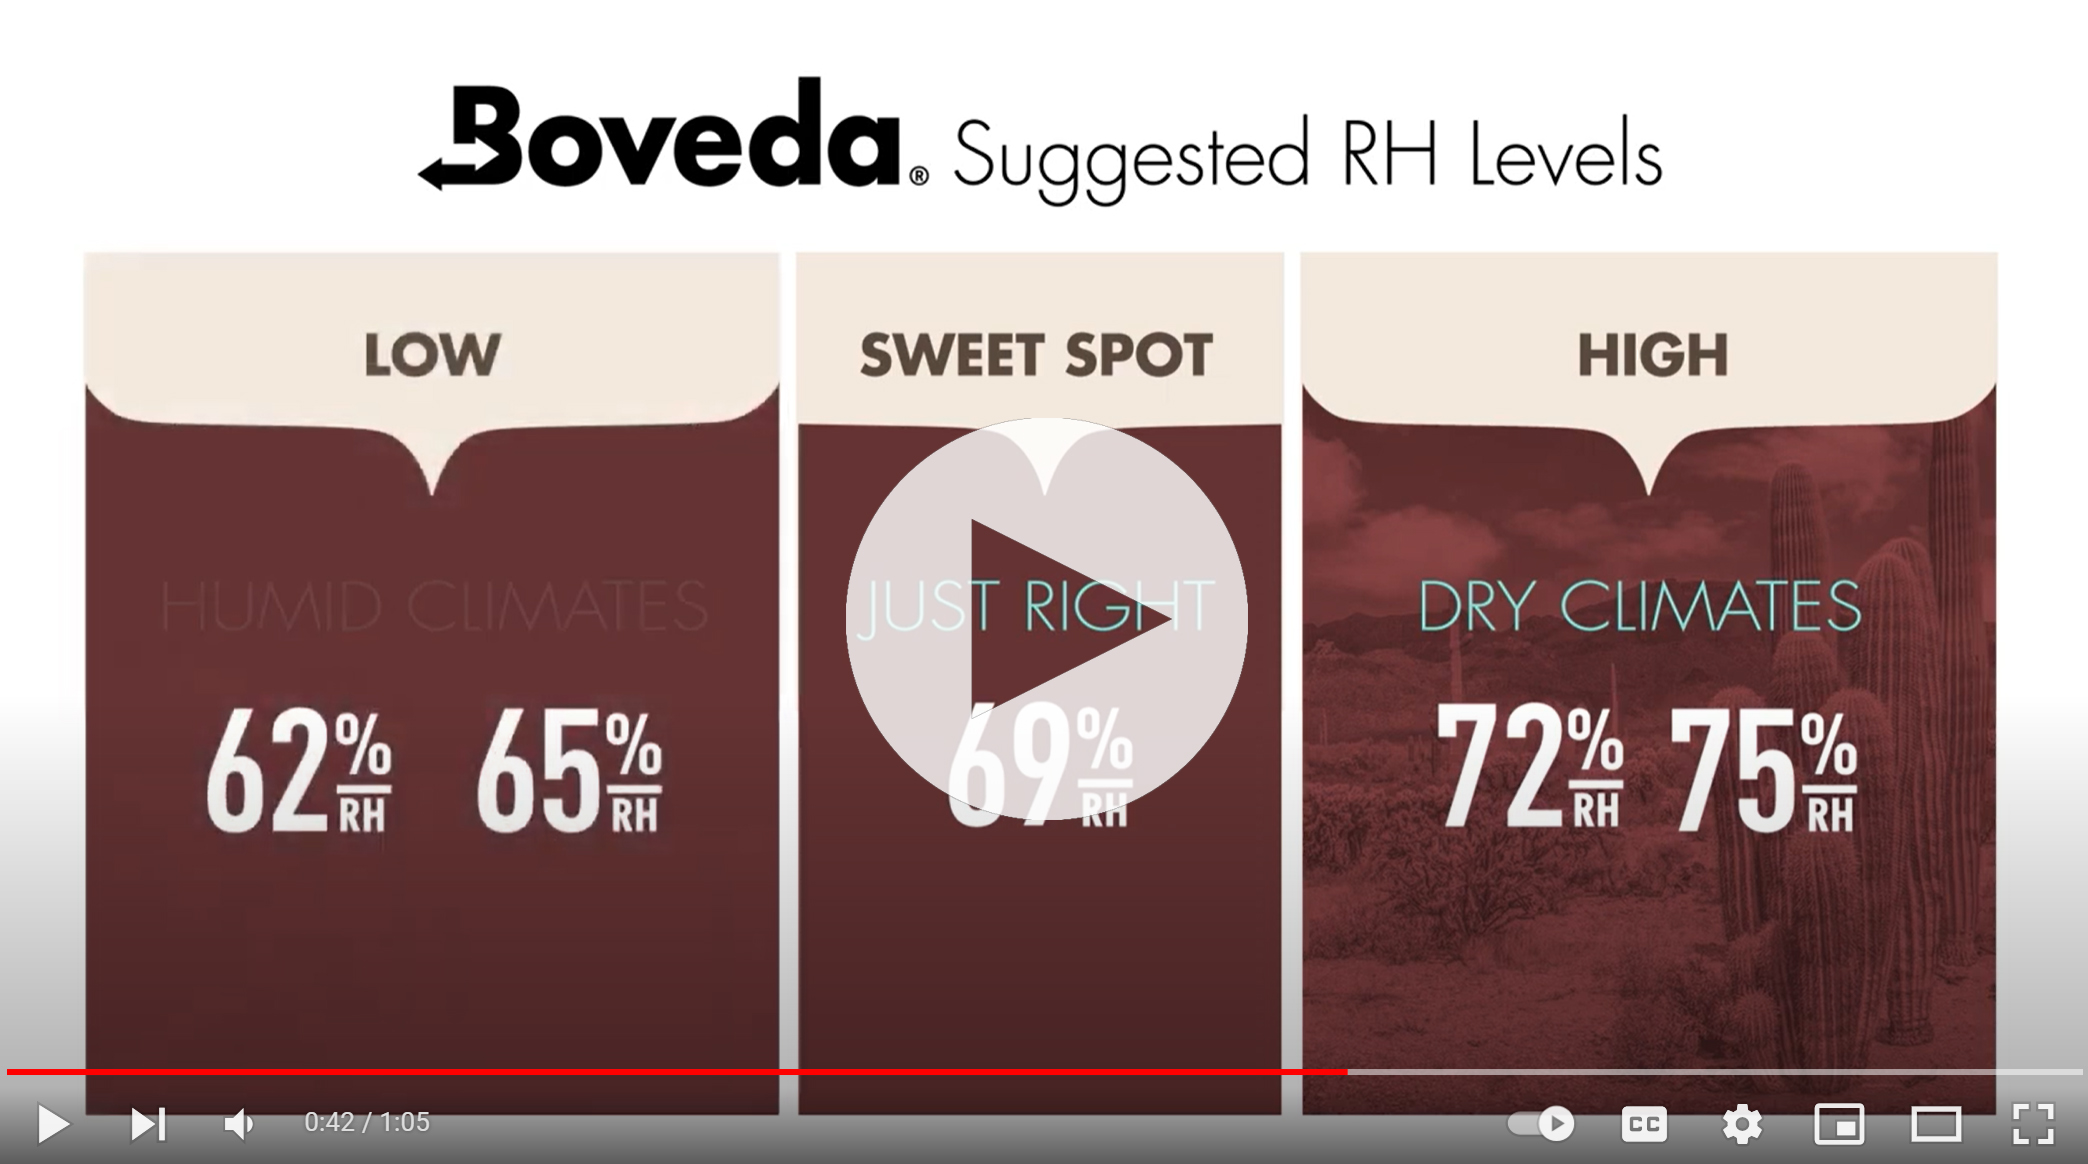 What Boveda Relative Humidity (RH) Should You Use For a Cigar Humidor